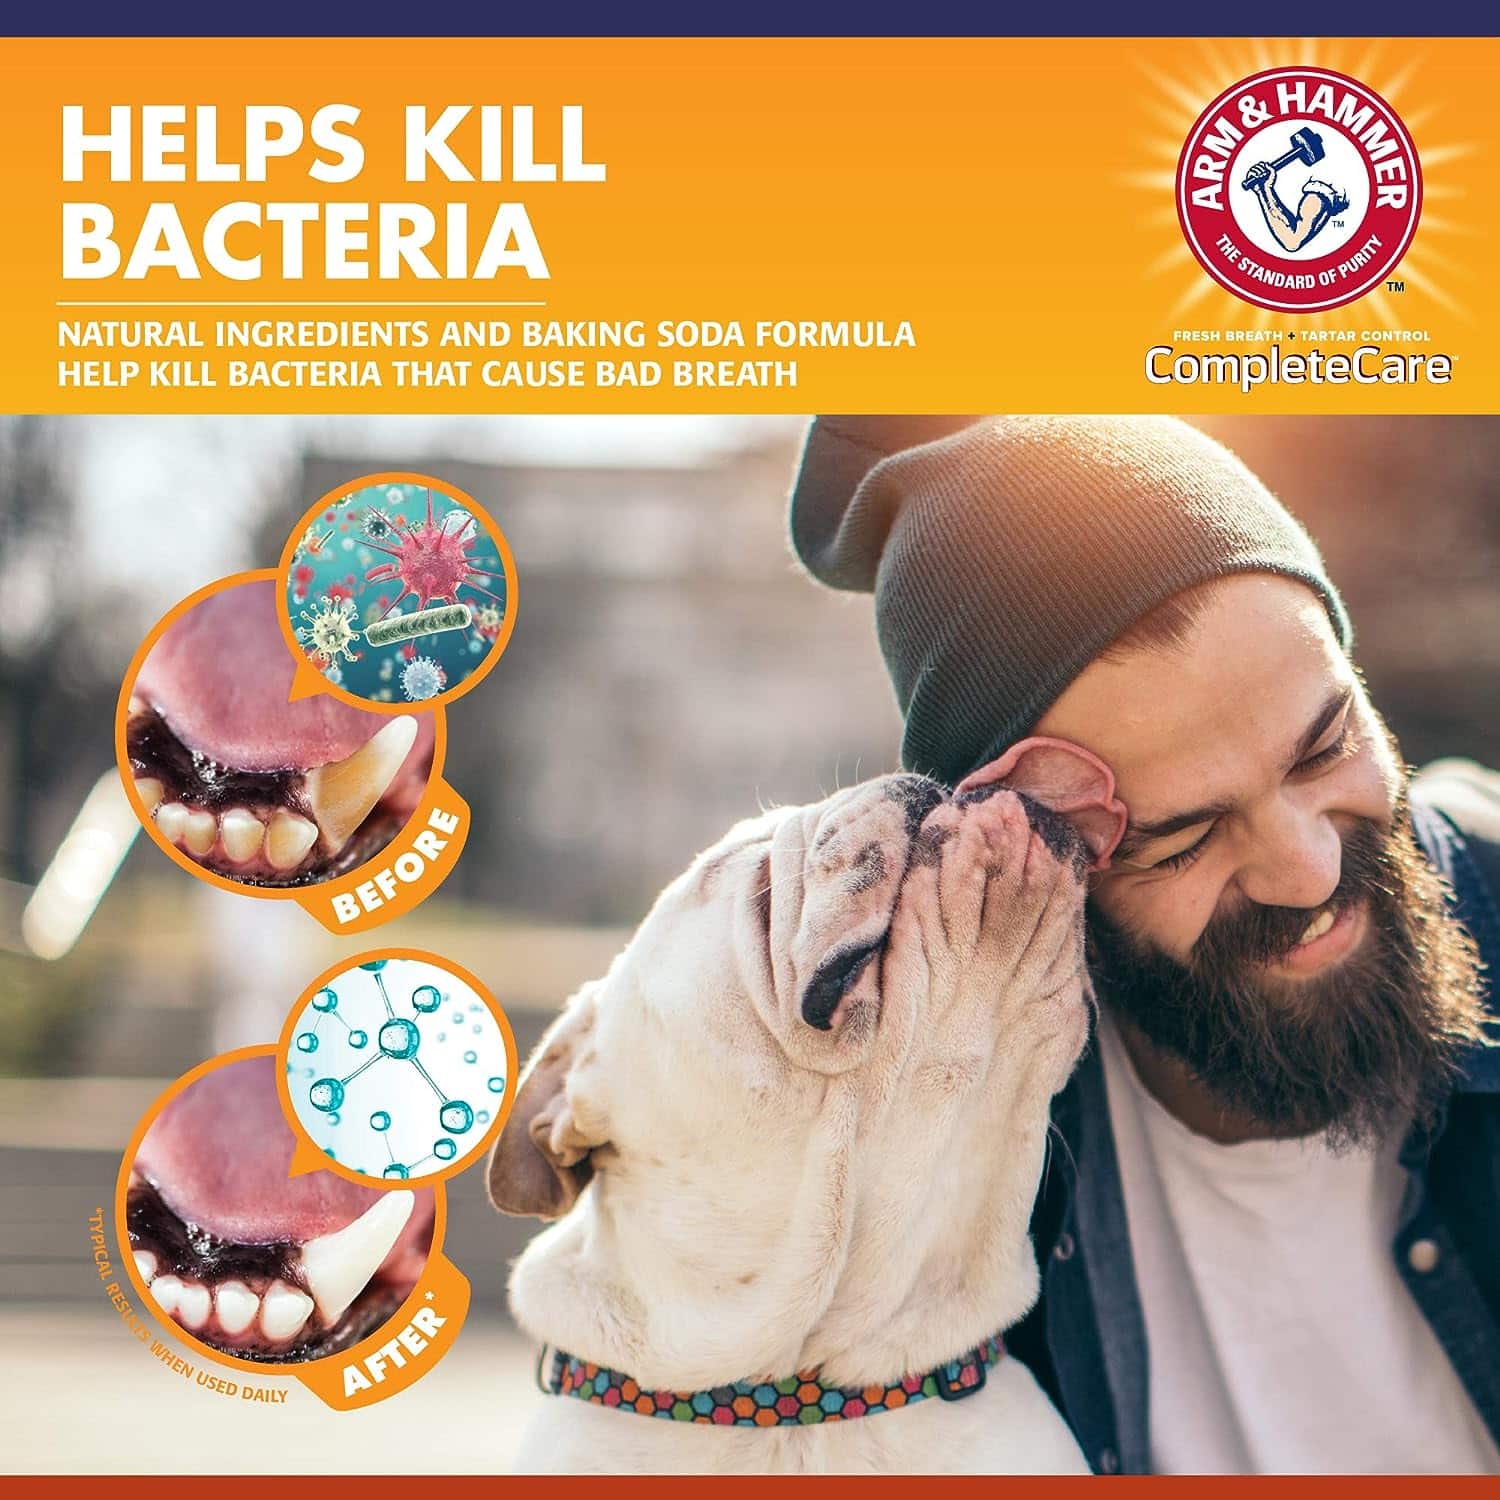 Arm & Hammer Complete Care Dog Dental Spray: The Ultimate Solution for Fresh Breath and Tartar Control